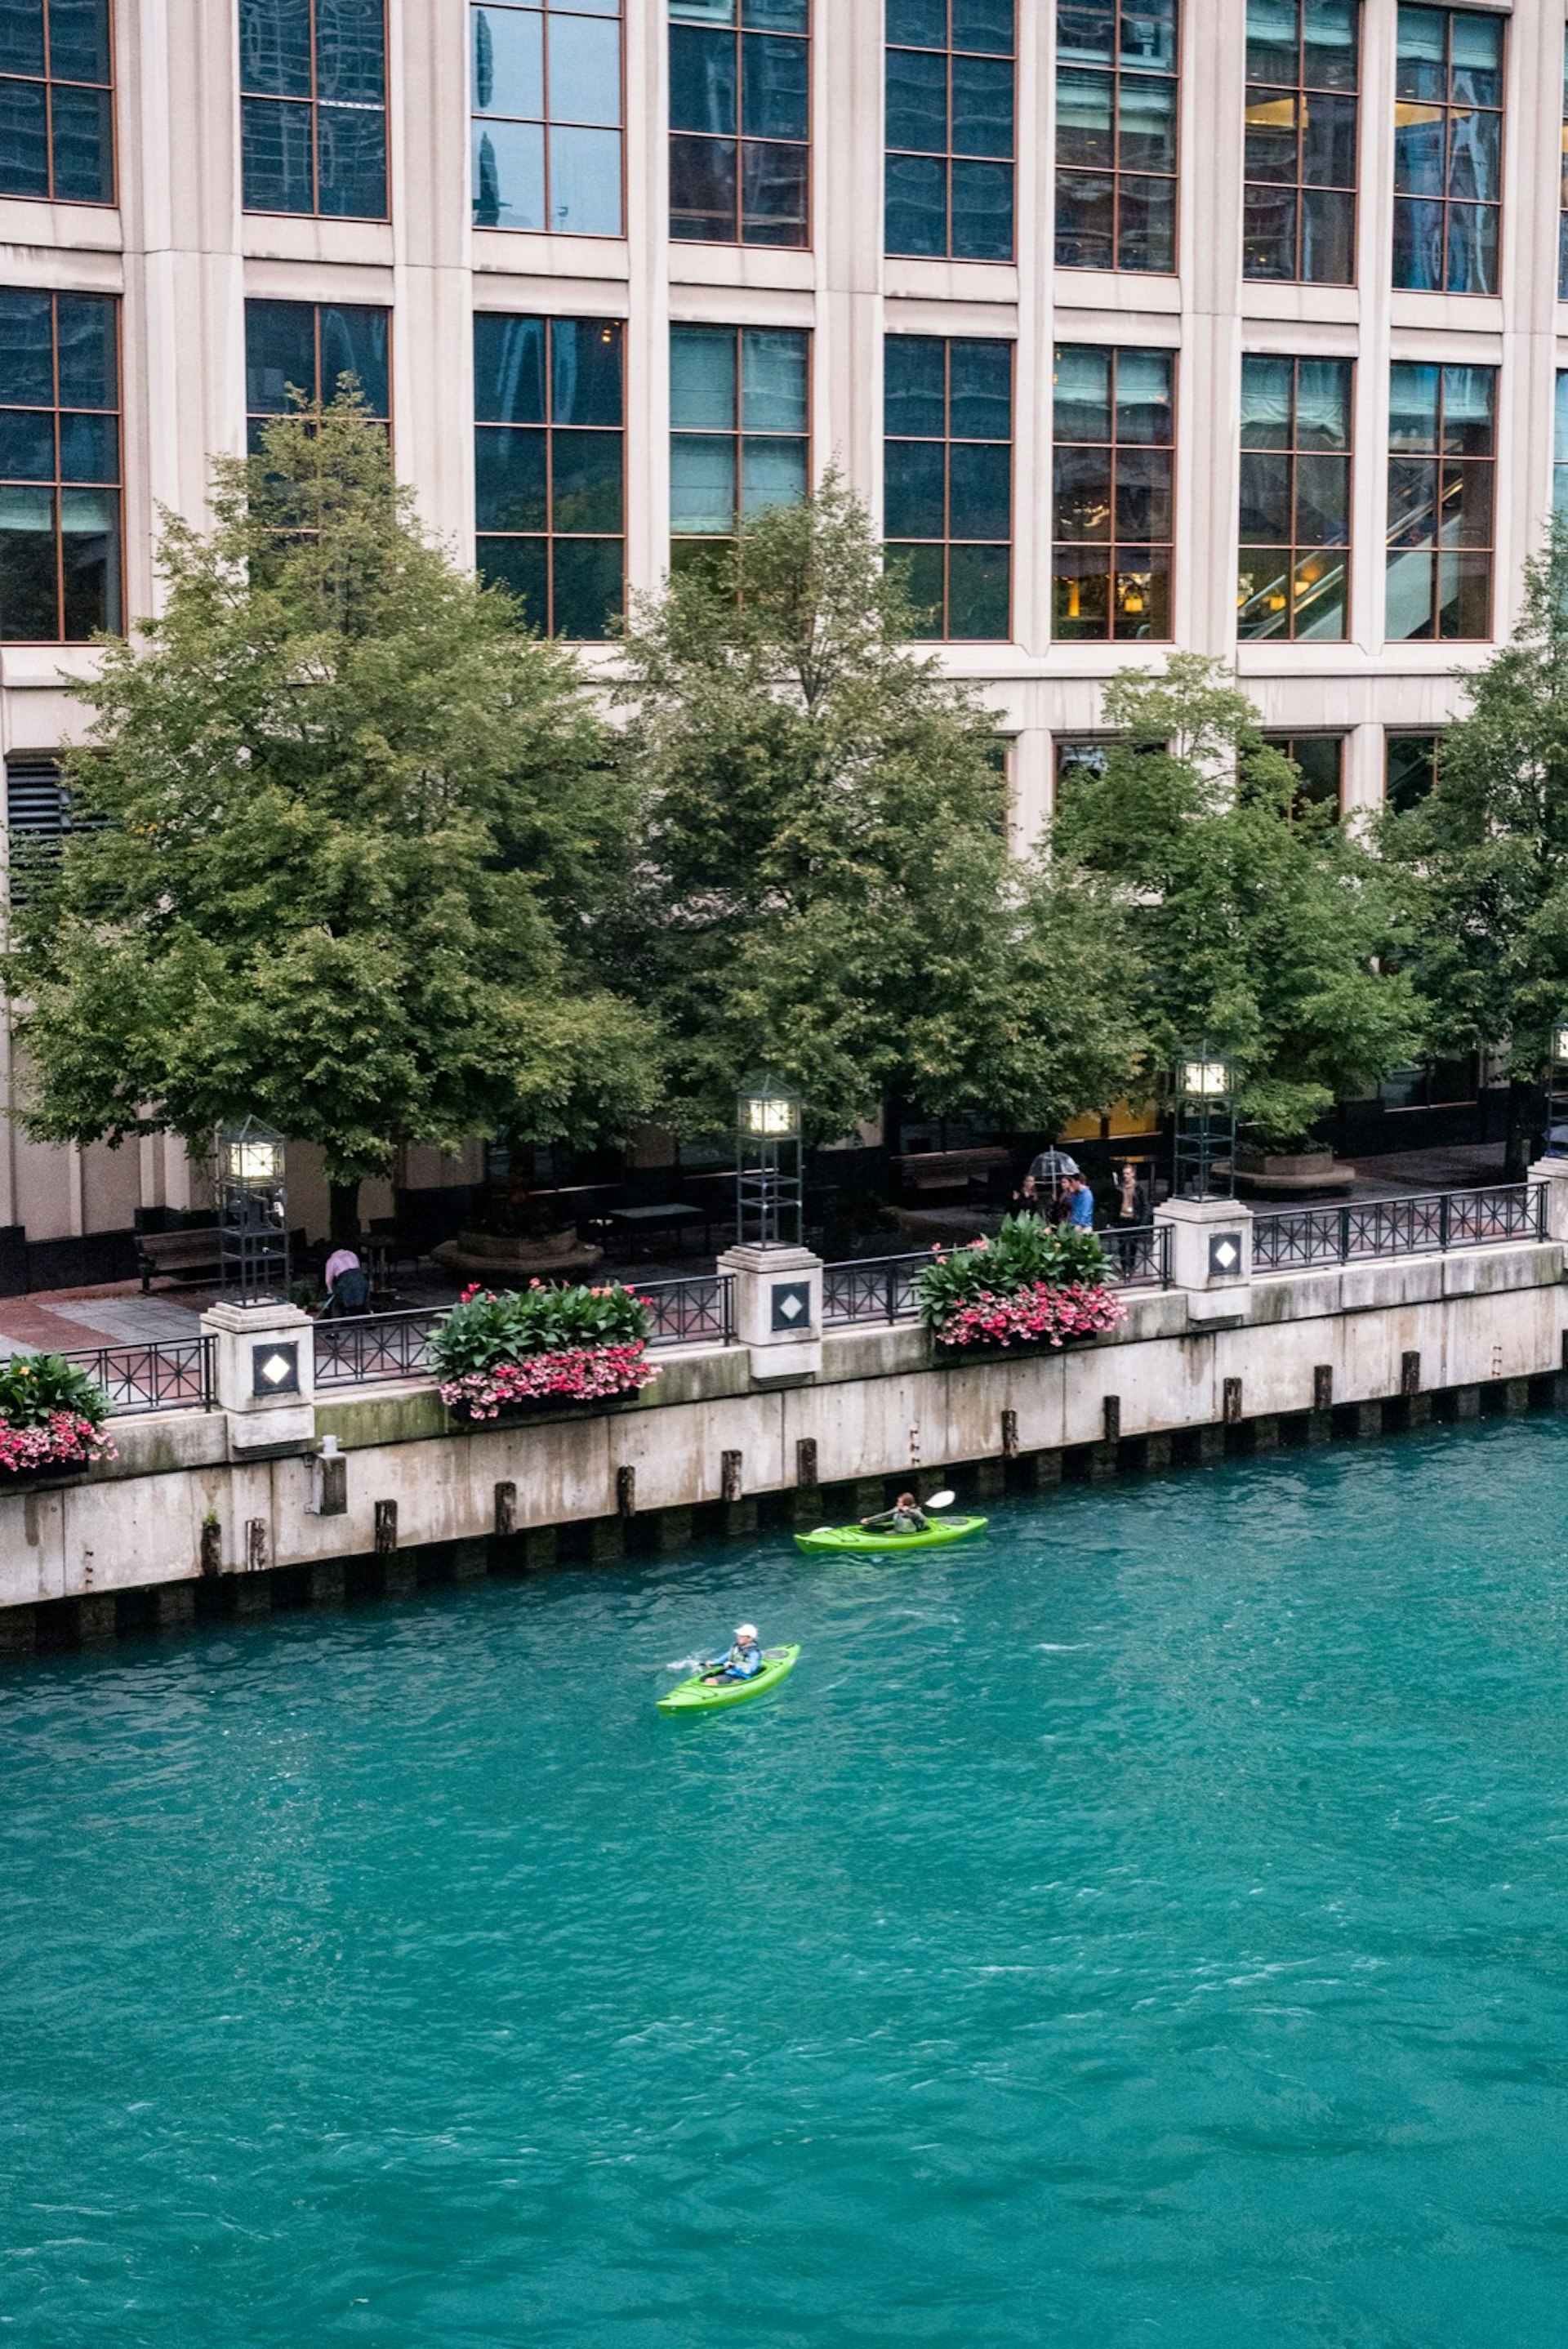 Two kayakers paddle down the Chicago River surrounded by high rises